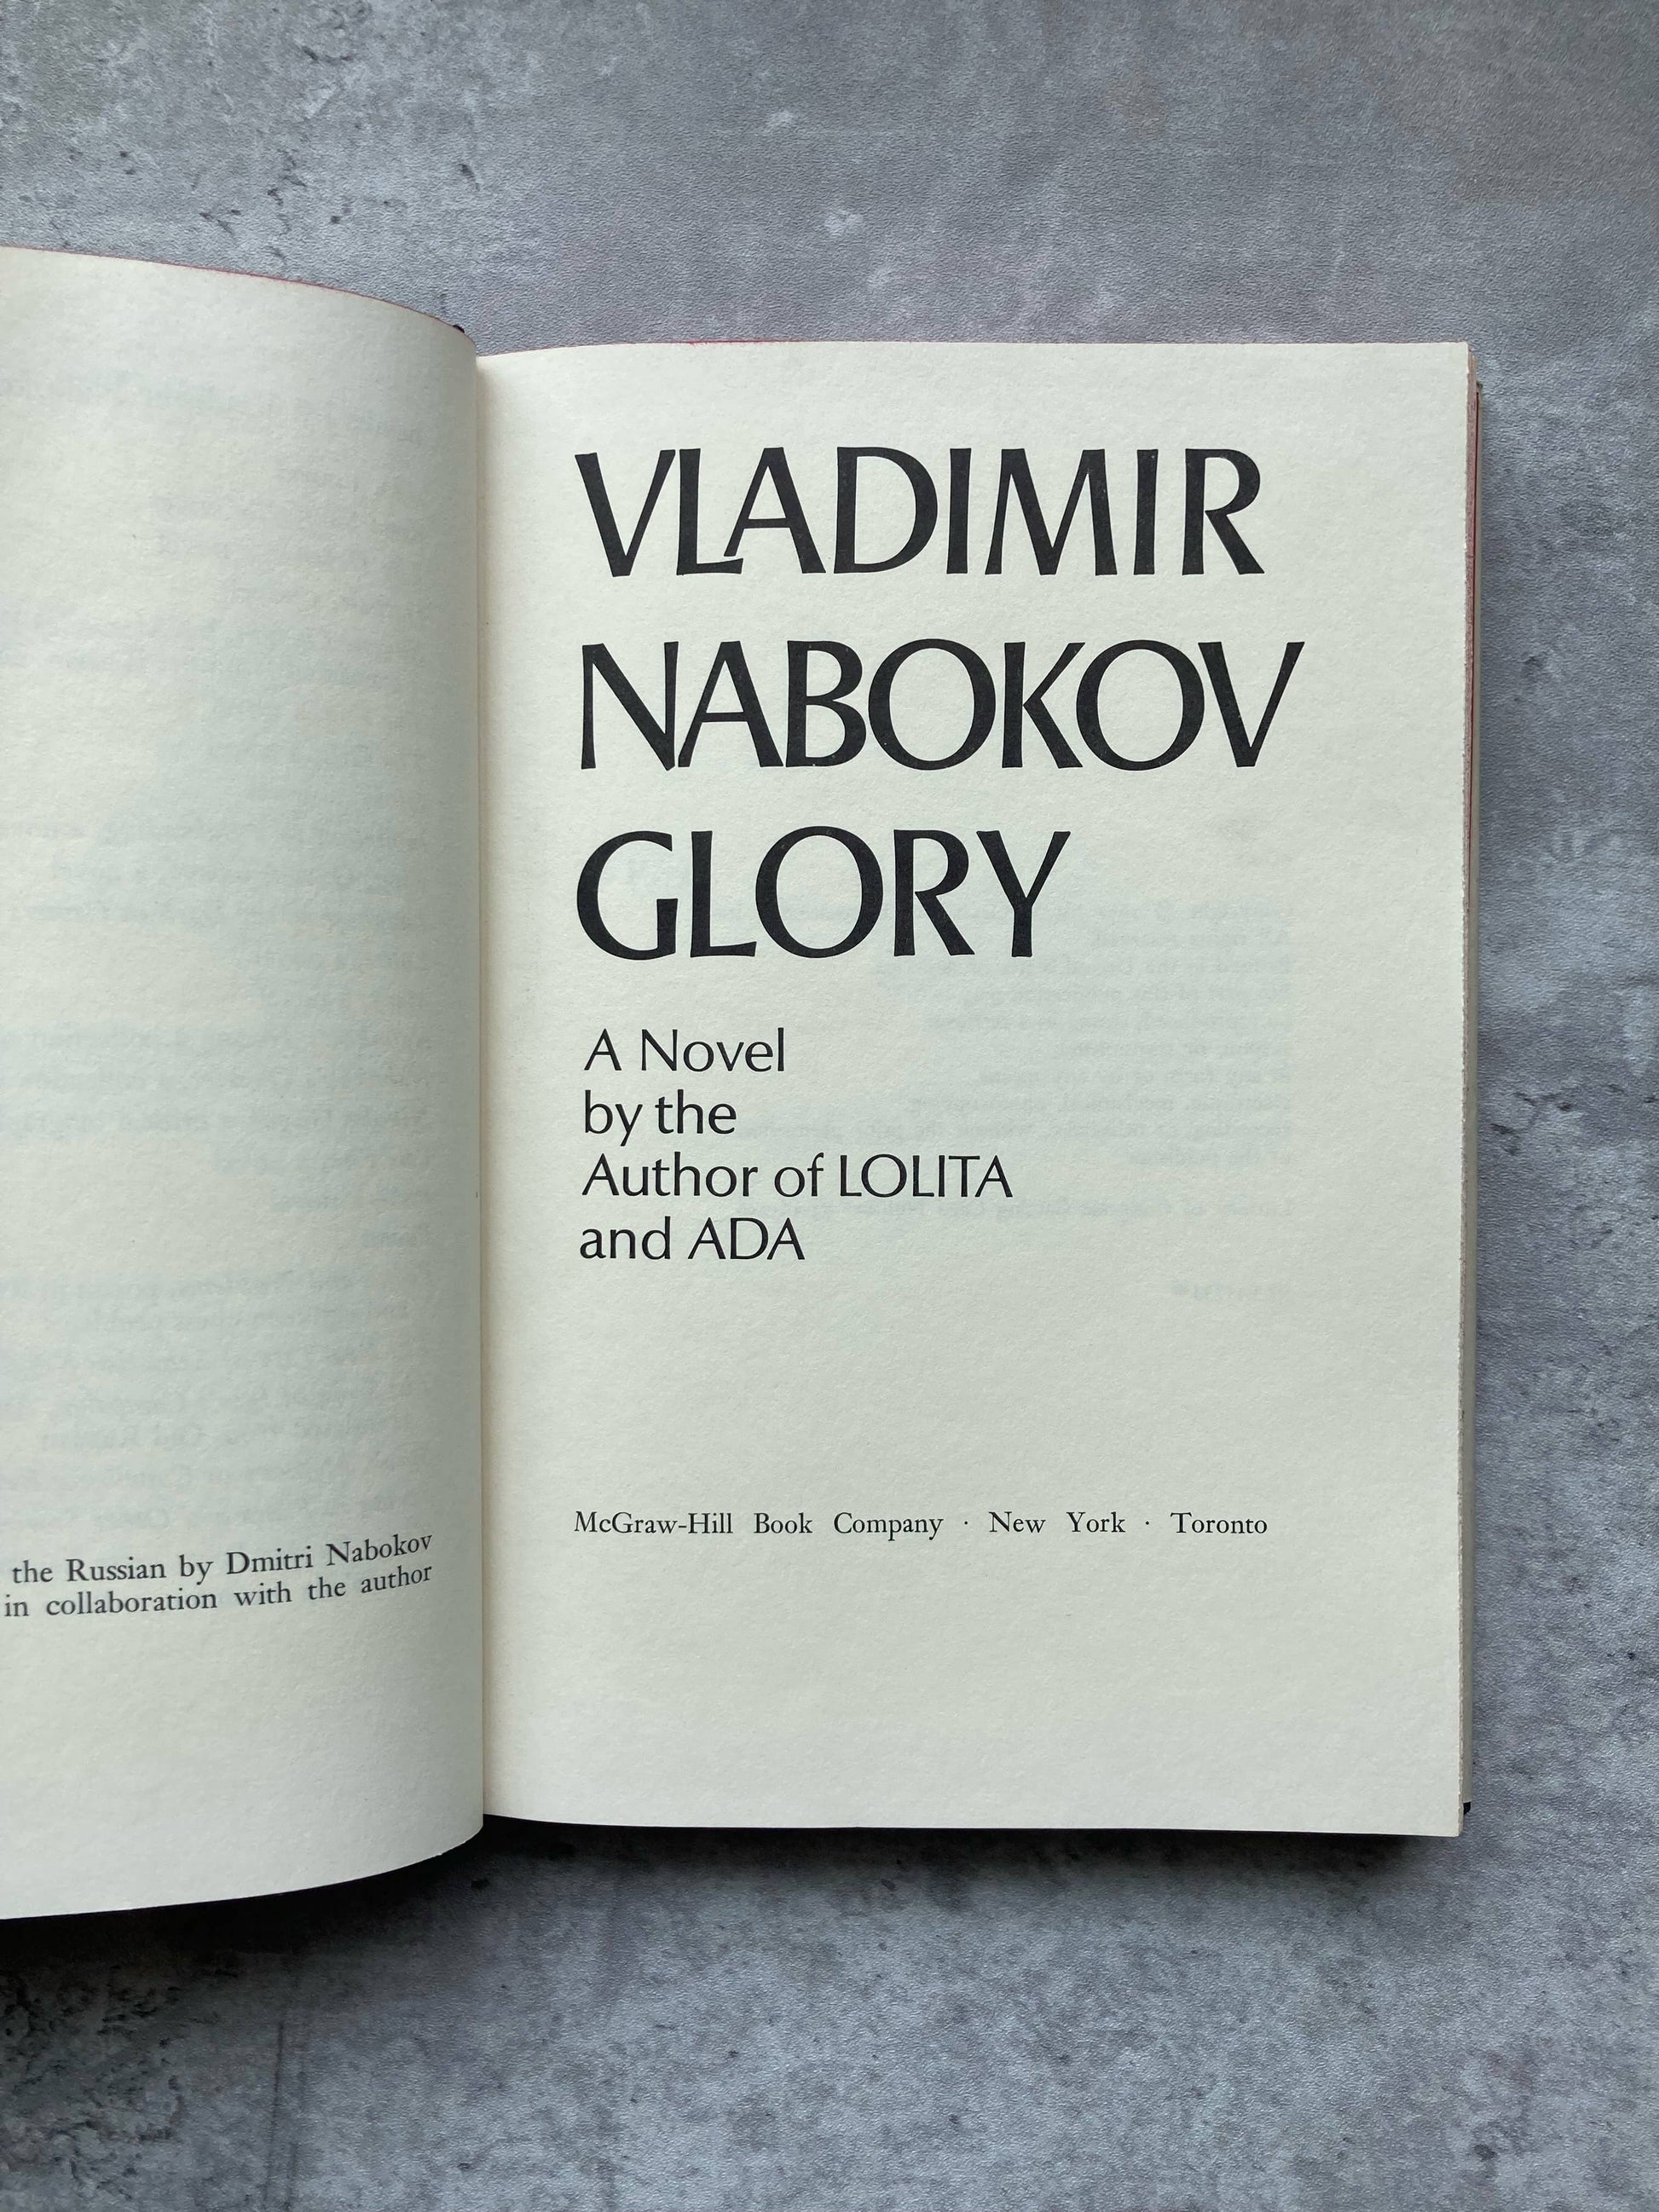 Glory by Vladimir Nabokov. Shop for new and used books with The Stone Circle, the only online bookstore near you in Los Angeles, California.